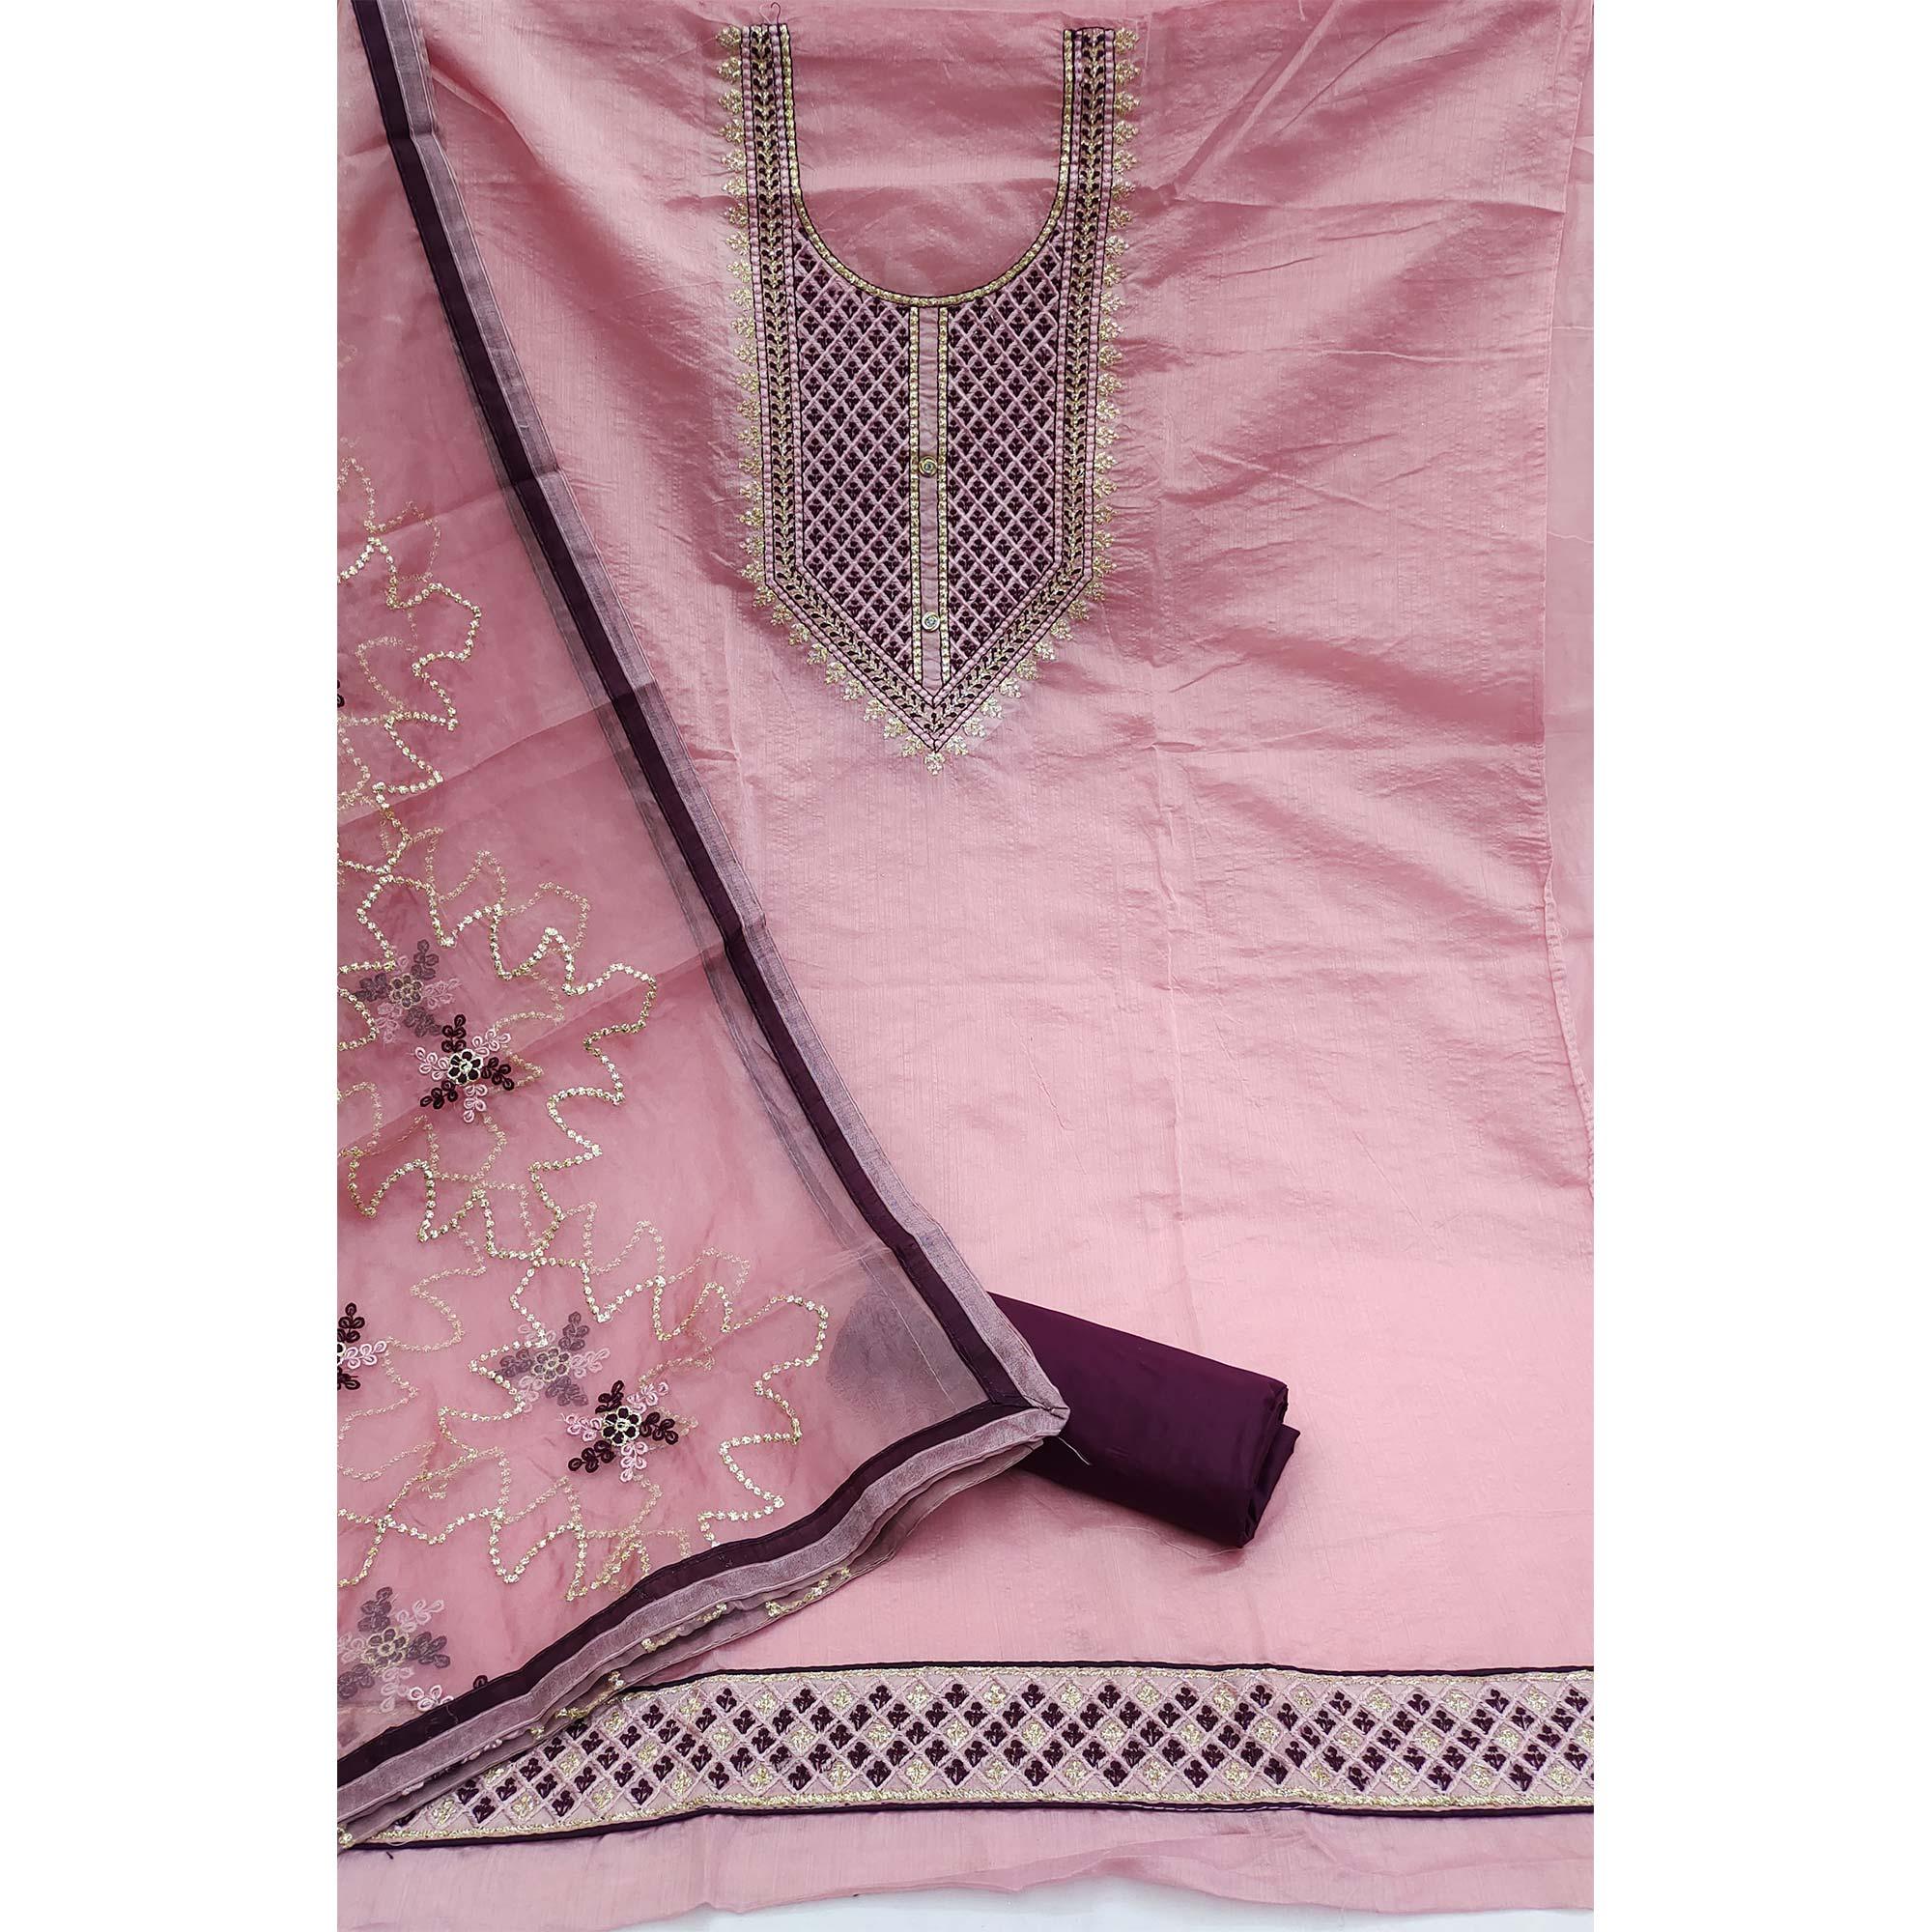 Pink Festive Wear Embroidered Chanderi Dress Material - Peachmode